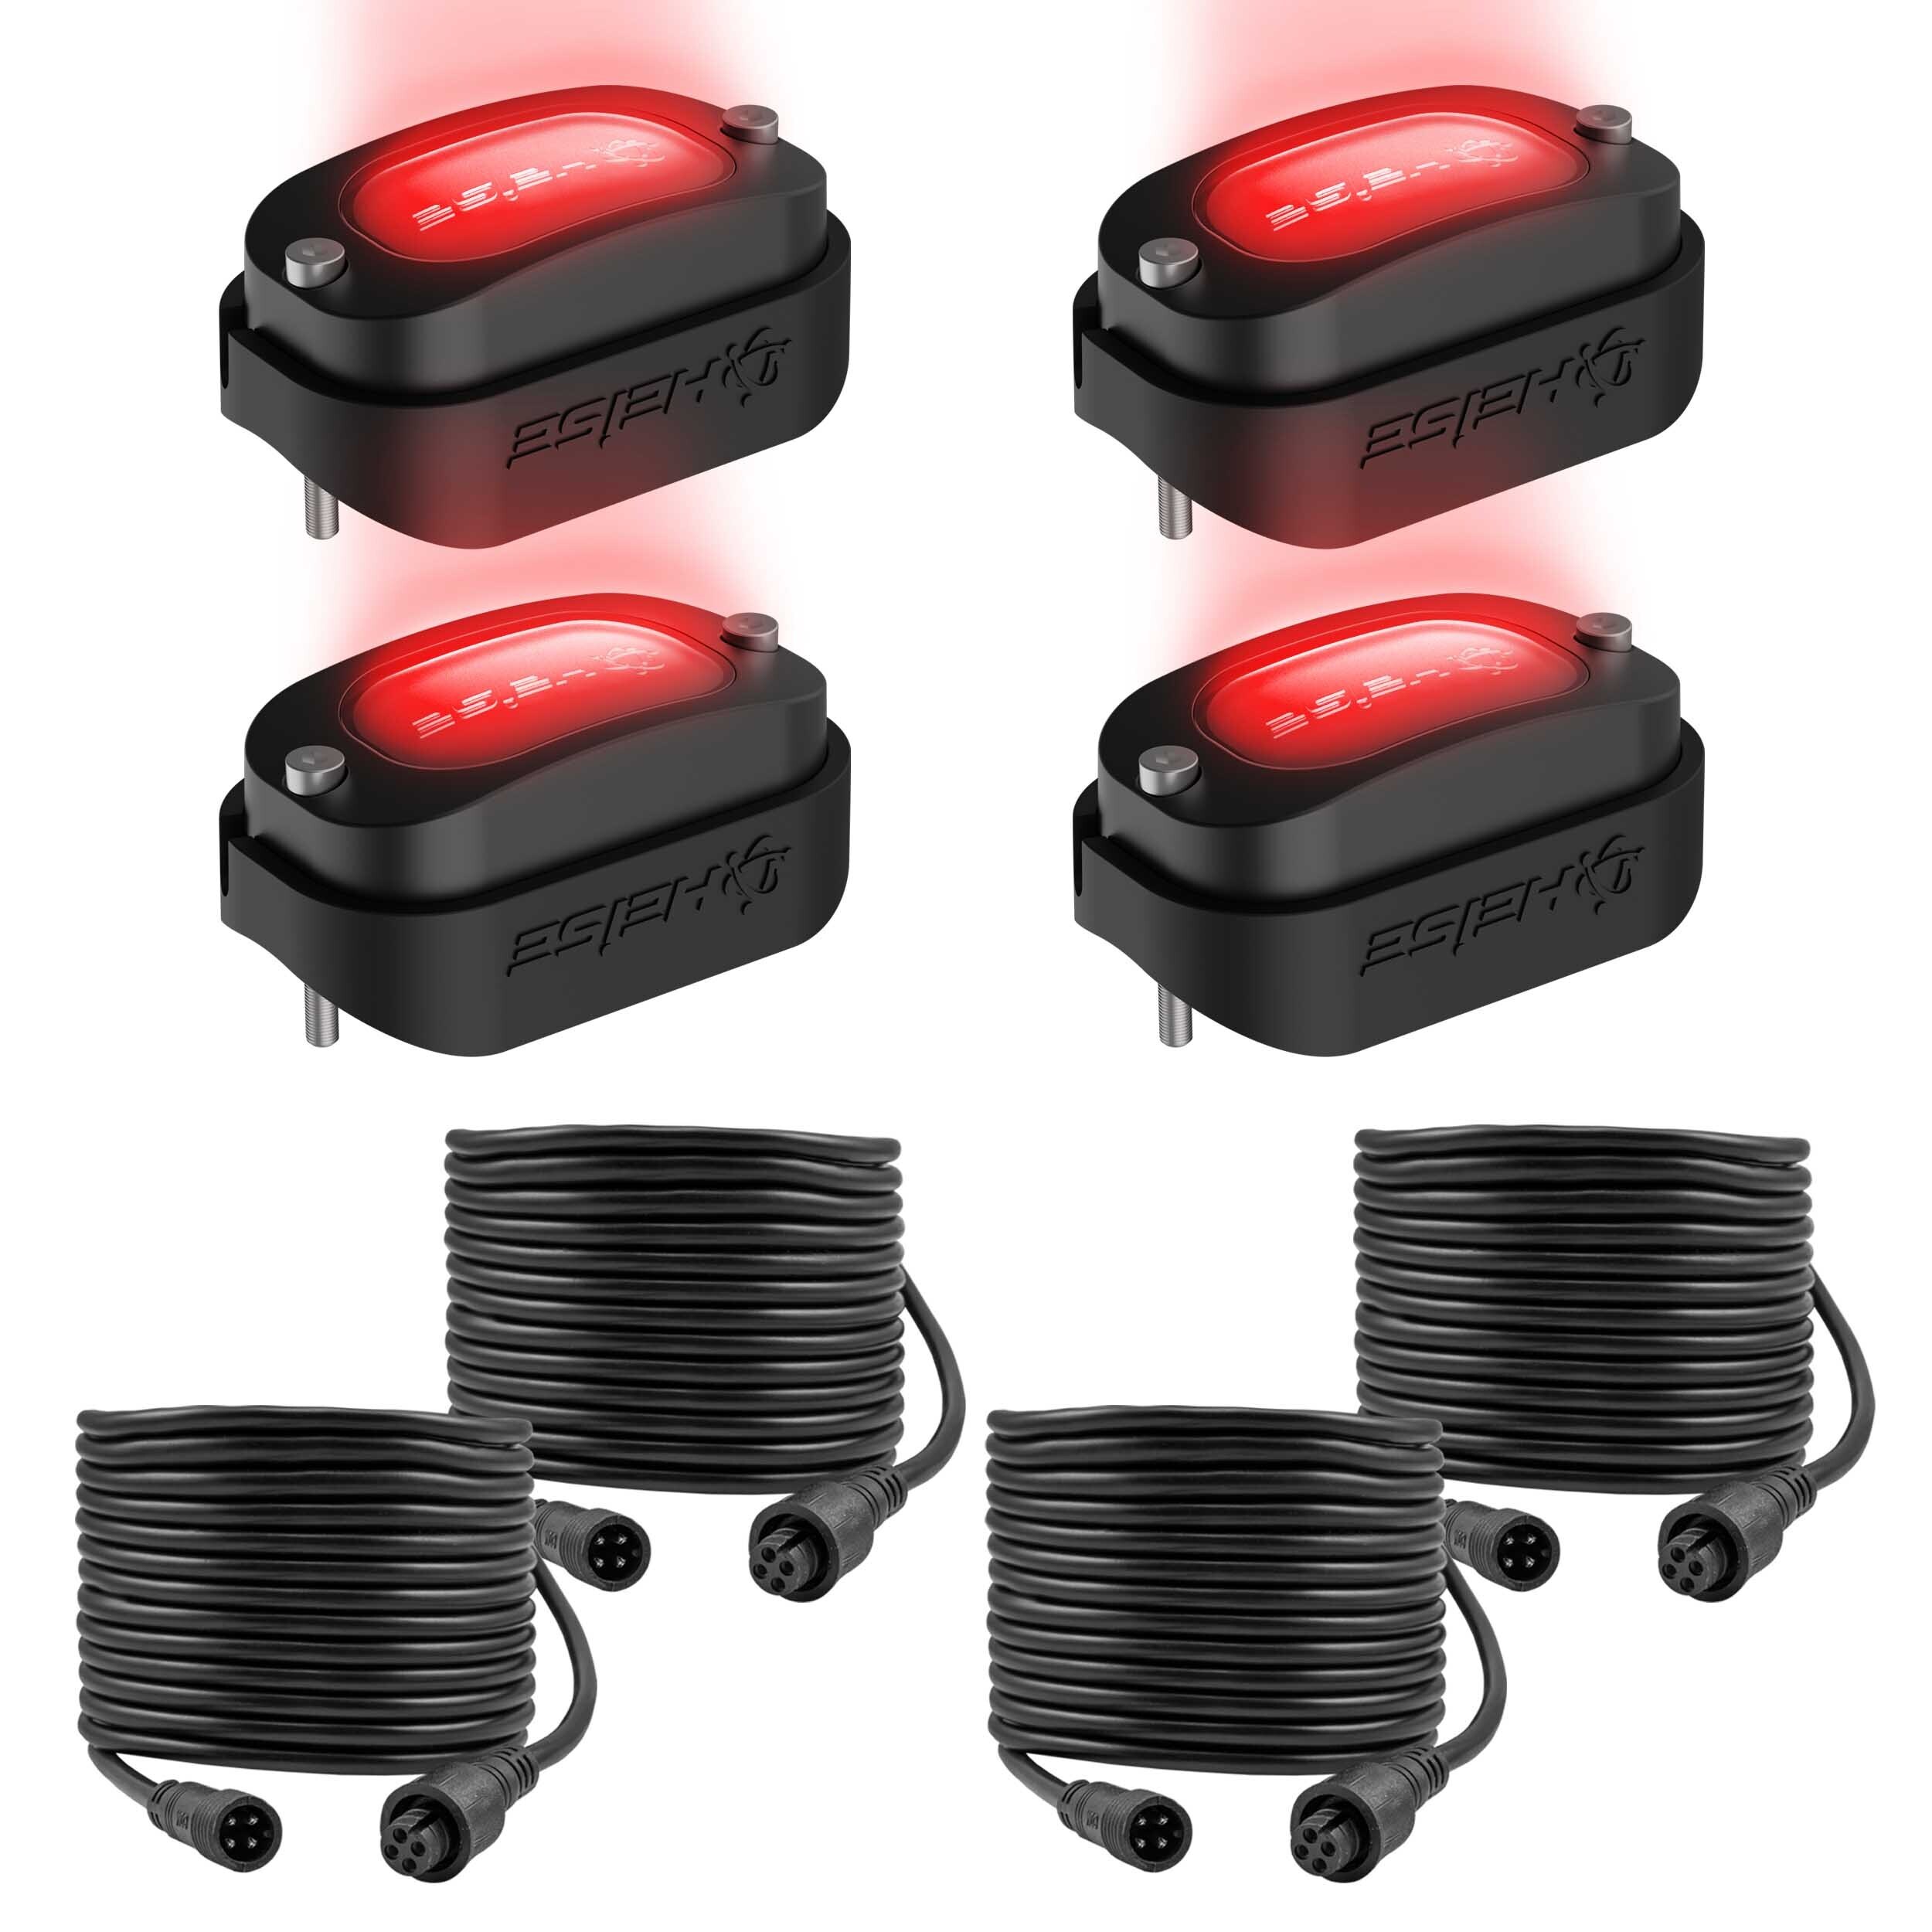 Chasing Wide Angle Rock Light Kit - 4 Pack